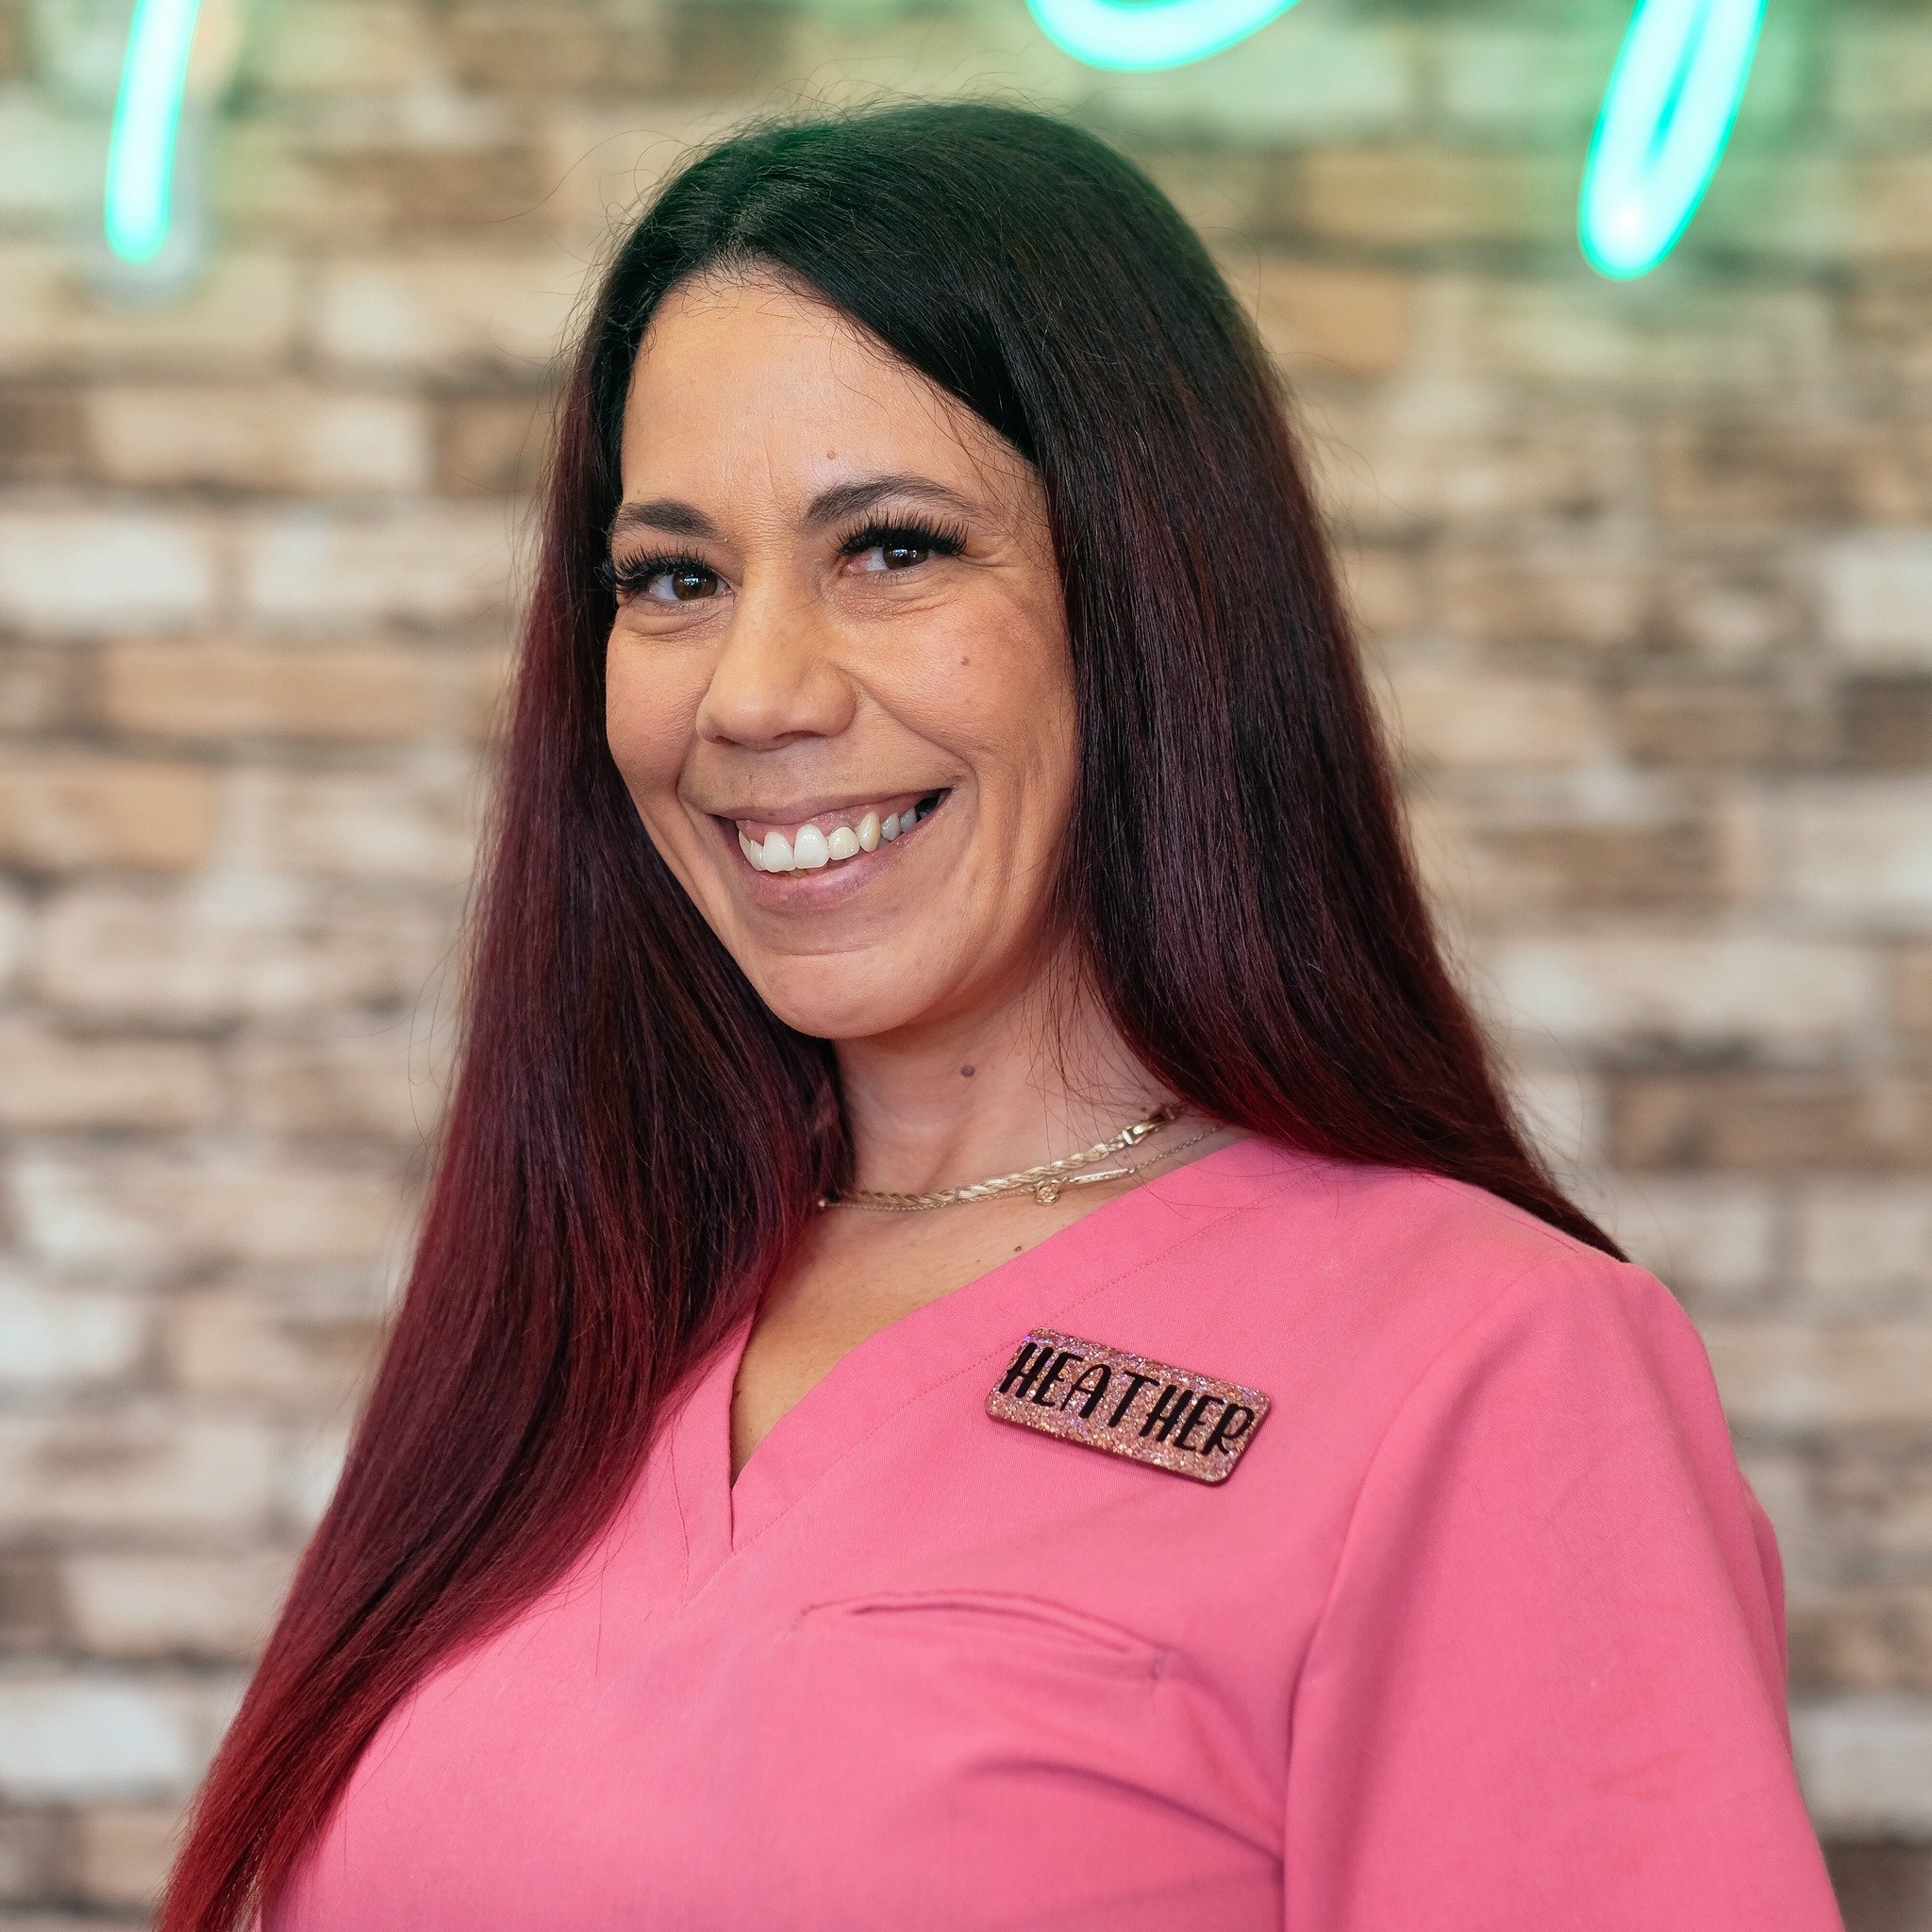 Meet Our Salon Manager ✨ Hi, I&rsquo;m Heather! I&rsquo;ve been a groomer for 13 years, and I&rsquo;ve happily worked at here at the salon for 8 years and counting. What I love most about grooming is being able to create a lasting bond with both pup 